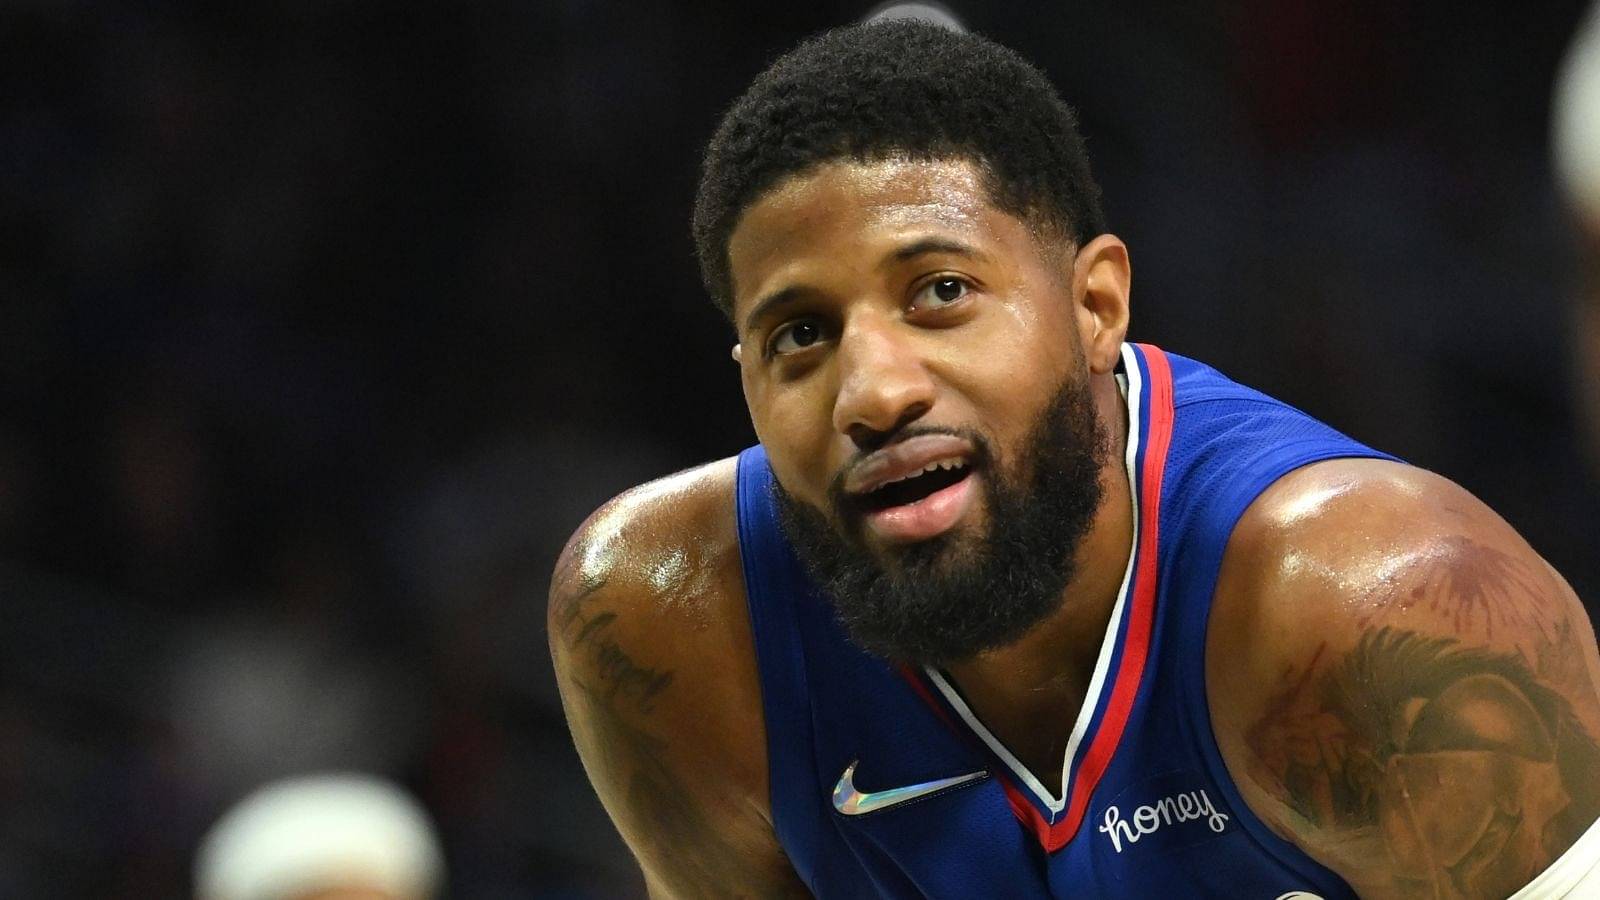 "Paul George OWNS the Utah Jazz!": NBA Twitter goes bonkers as Clippers star leads his team to a massive comeback in his first game back